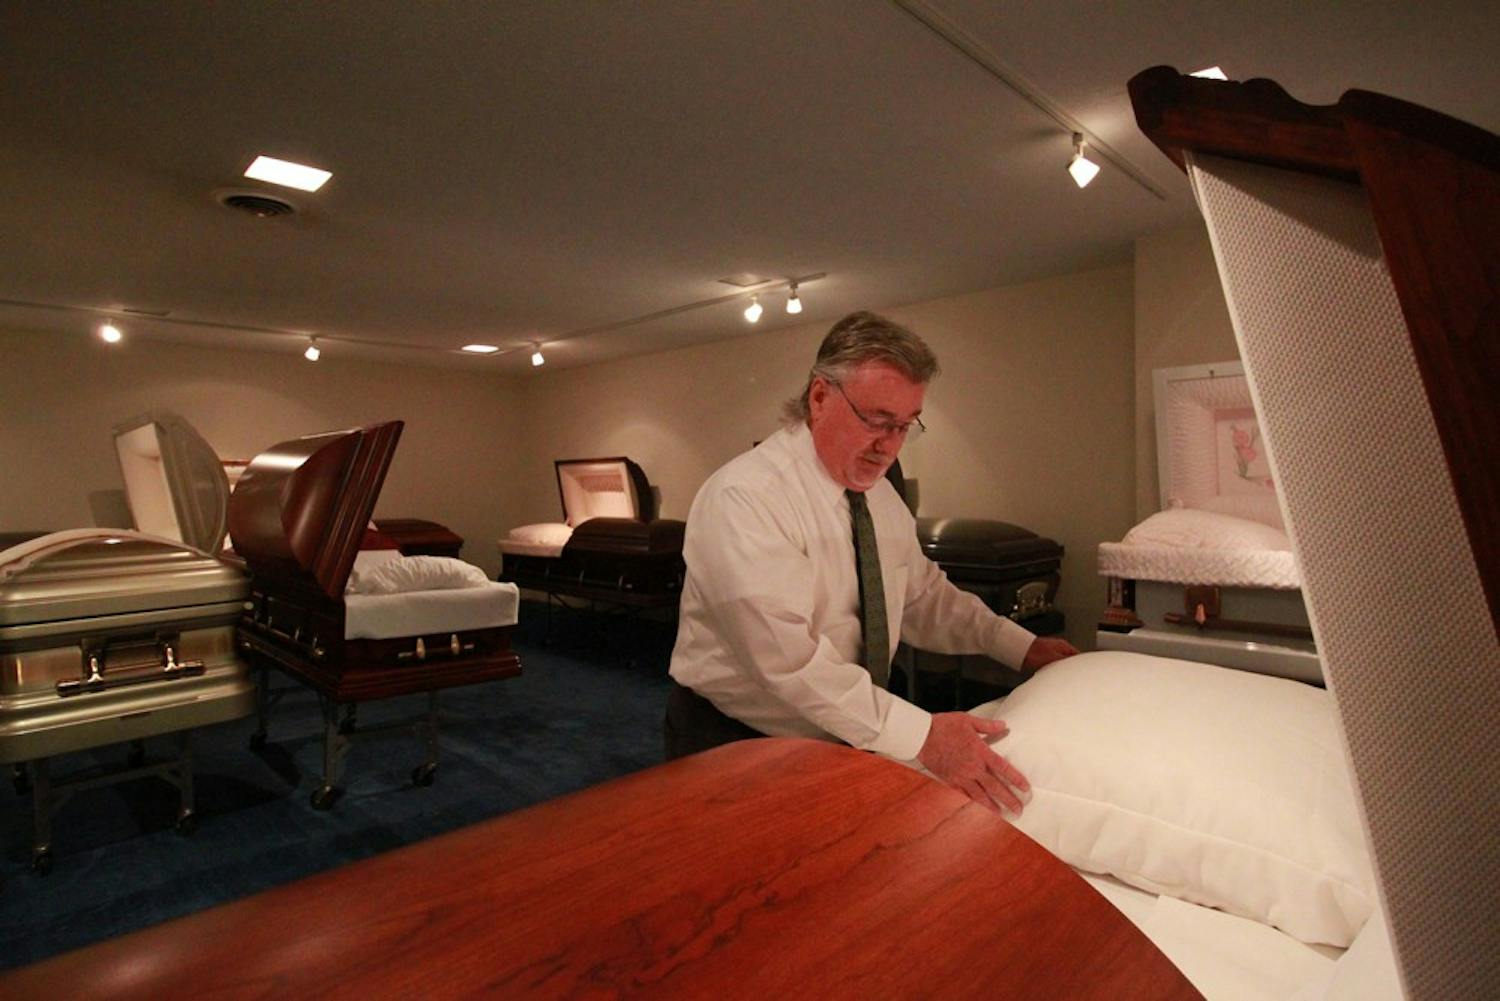 Art Sellers, director of Walker's Funeral Home, explains the casket selection process in the casket selection room of the funeral home. Families select caskets, urns and burial vaults here.